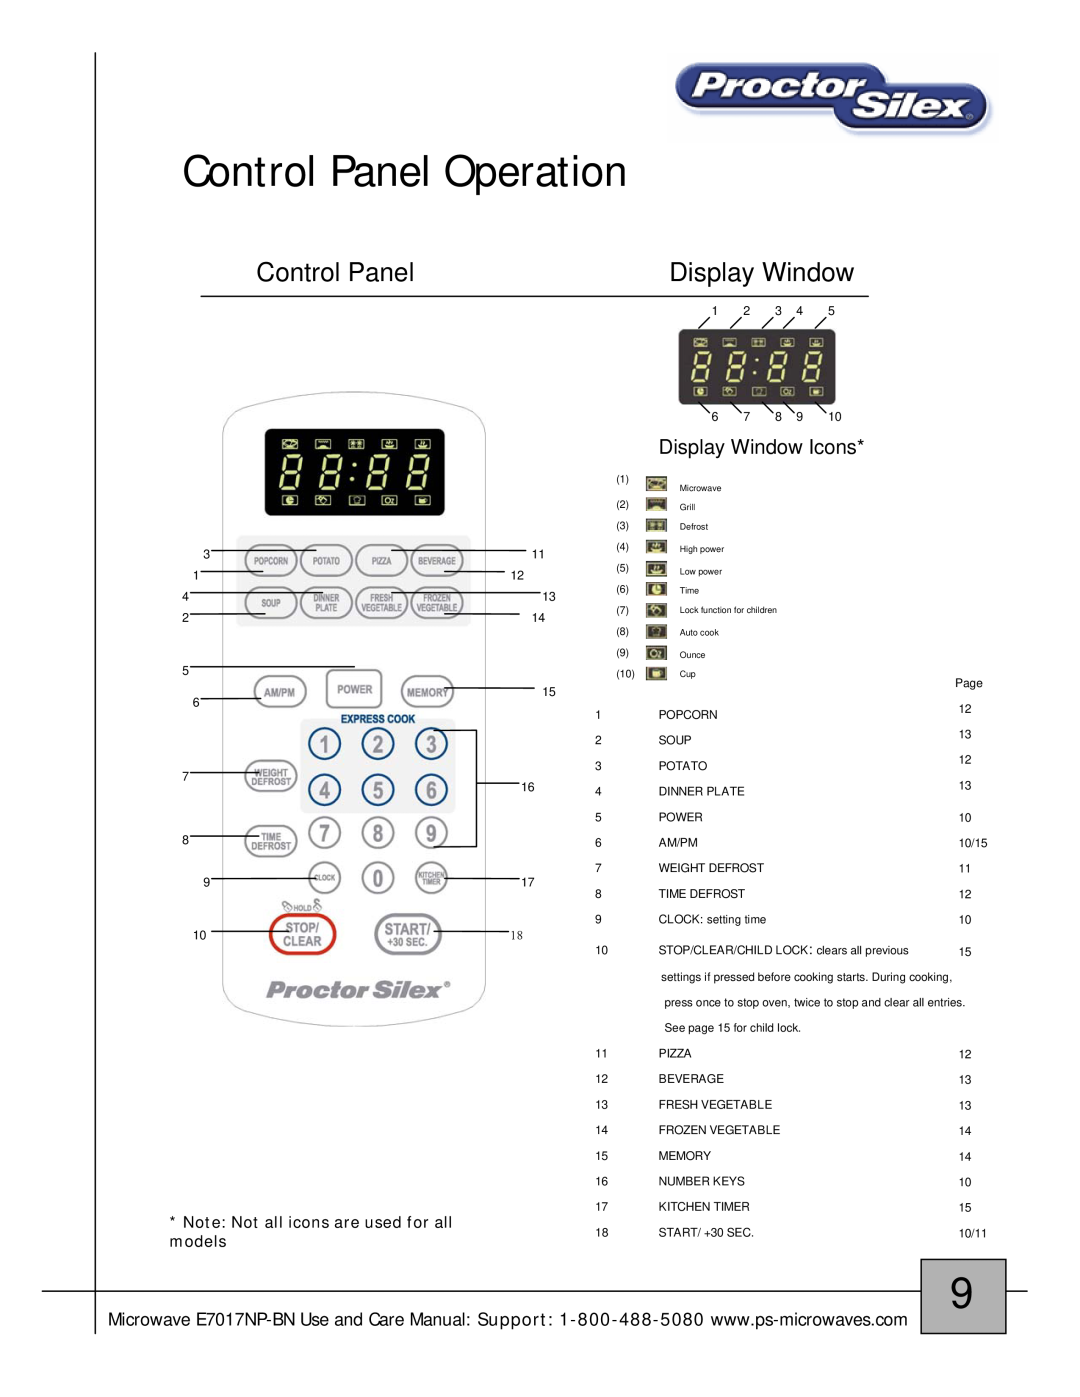 Proctor-Silex E7017NP-BN Control Panel Operation, Display Window Icons, Note Not all icons are used for all models 